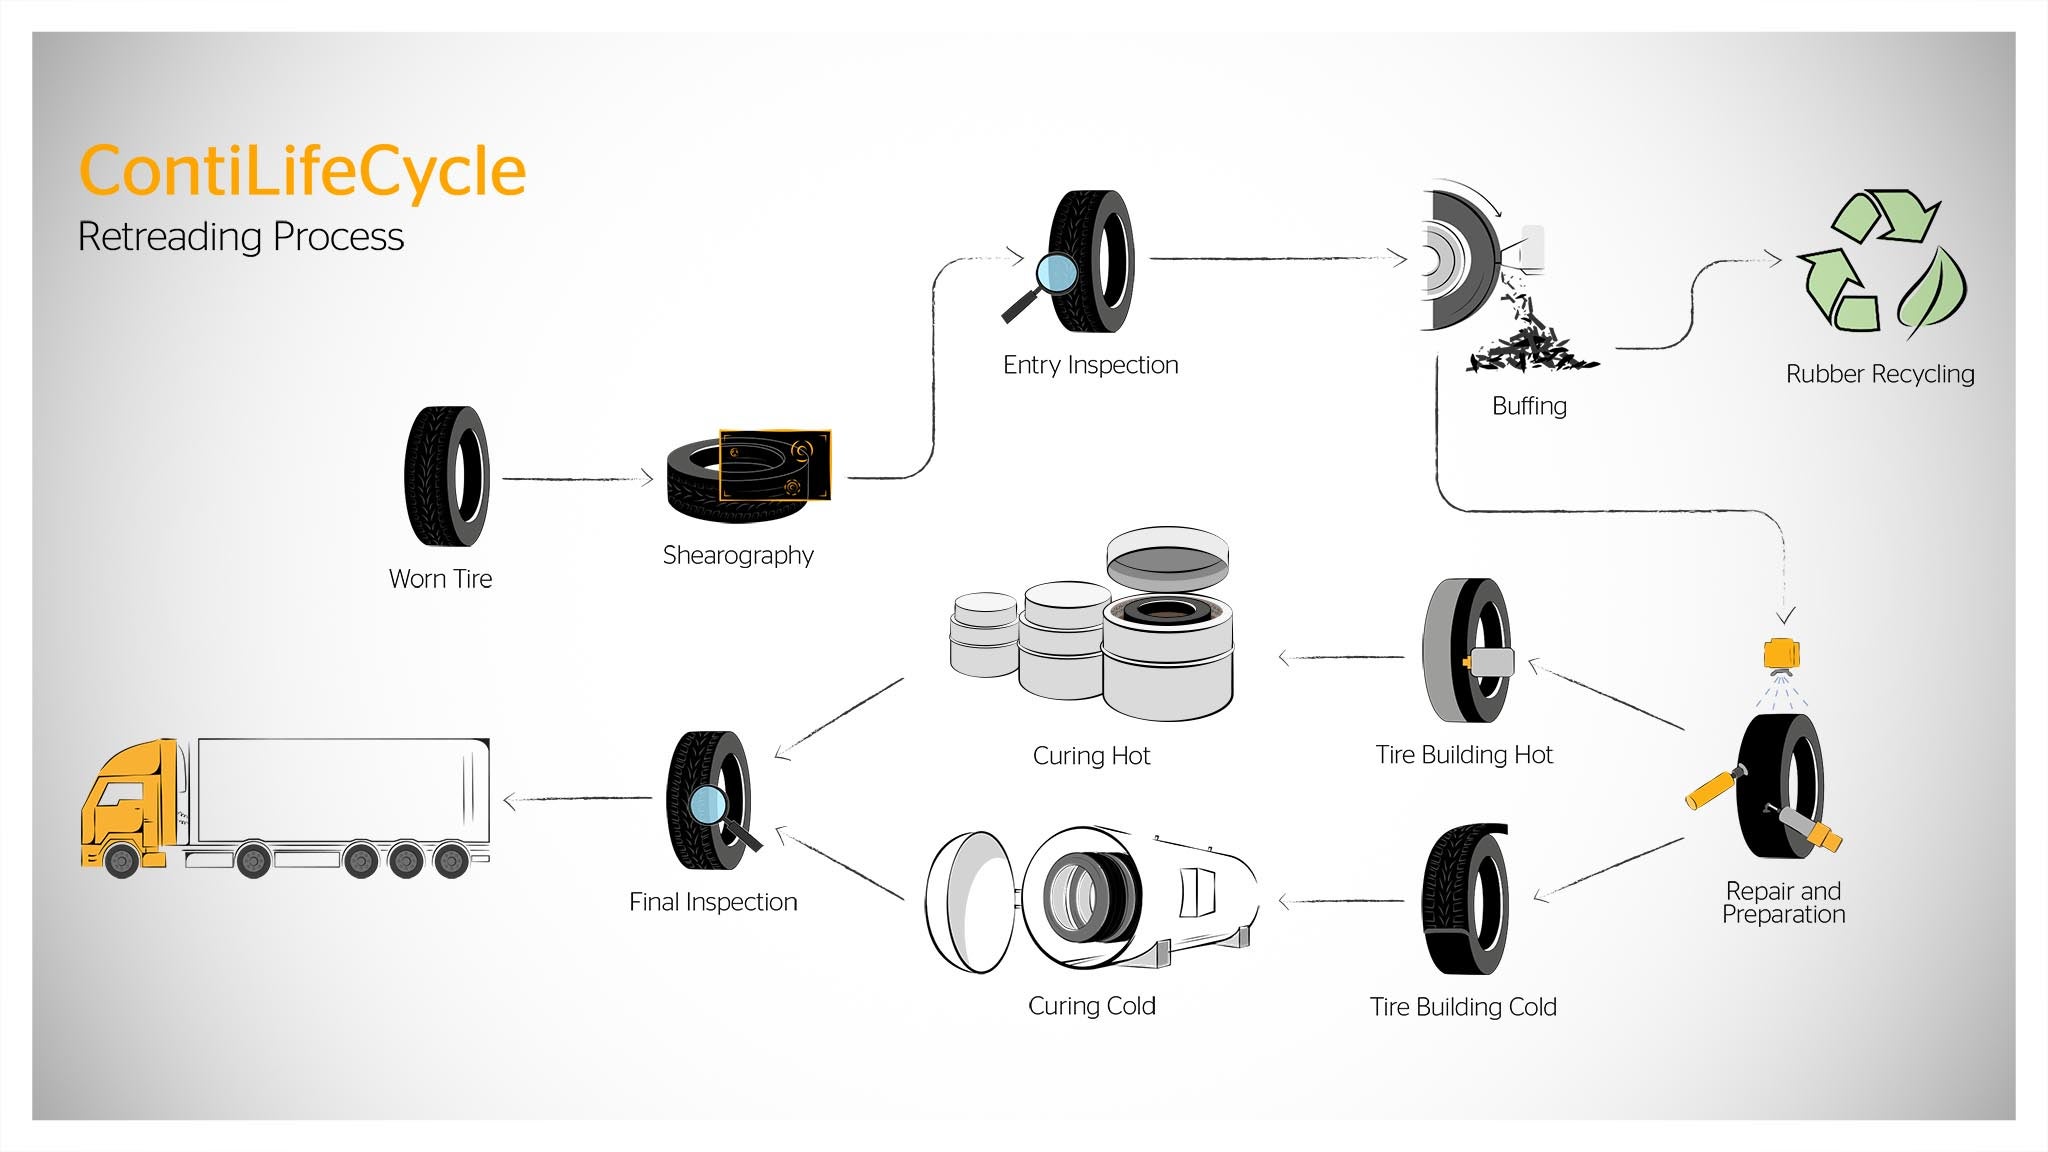 An animated timeline and procedure of Continentals retreading process of the worn tire 